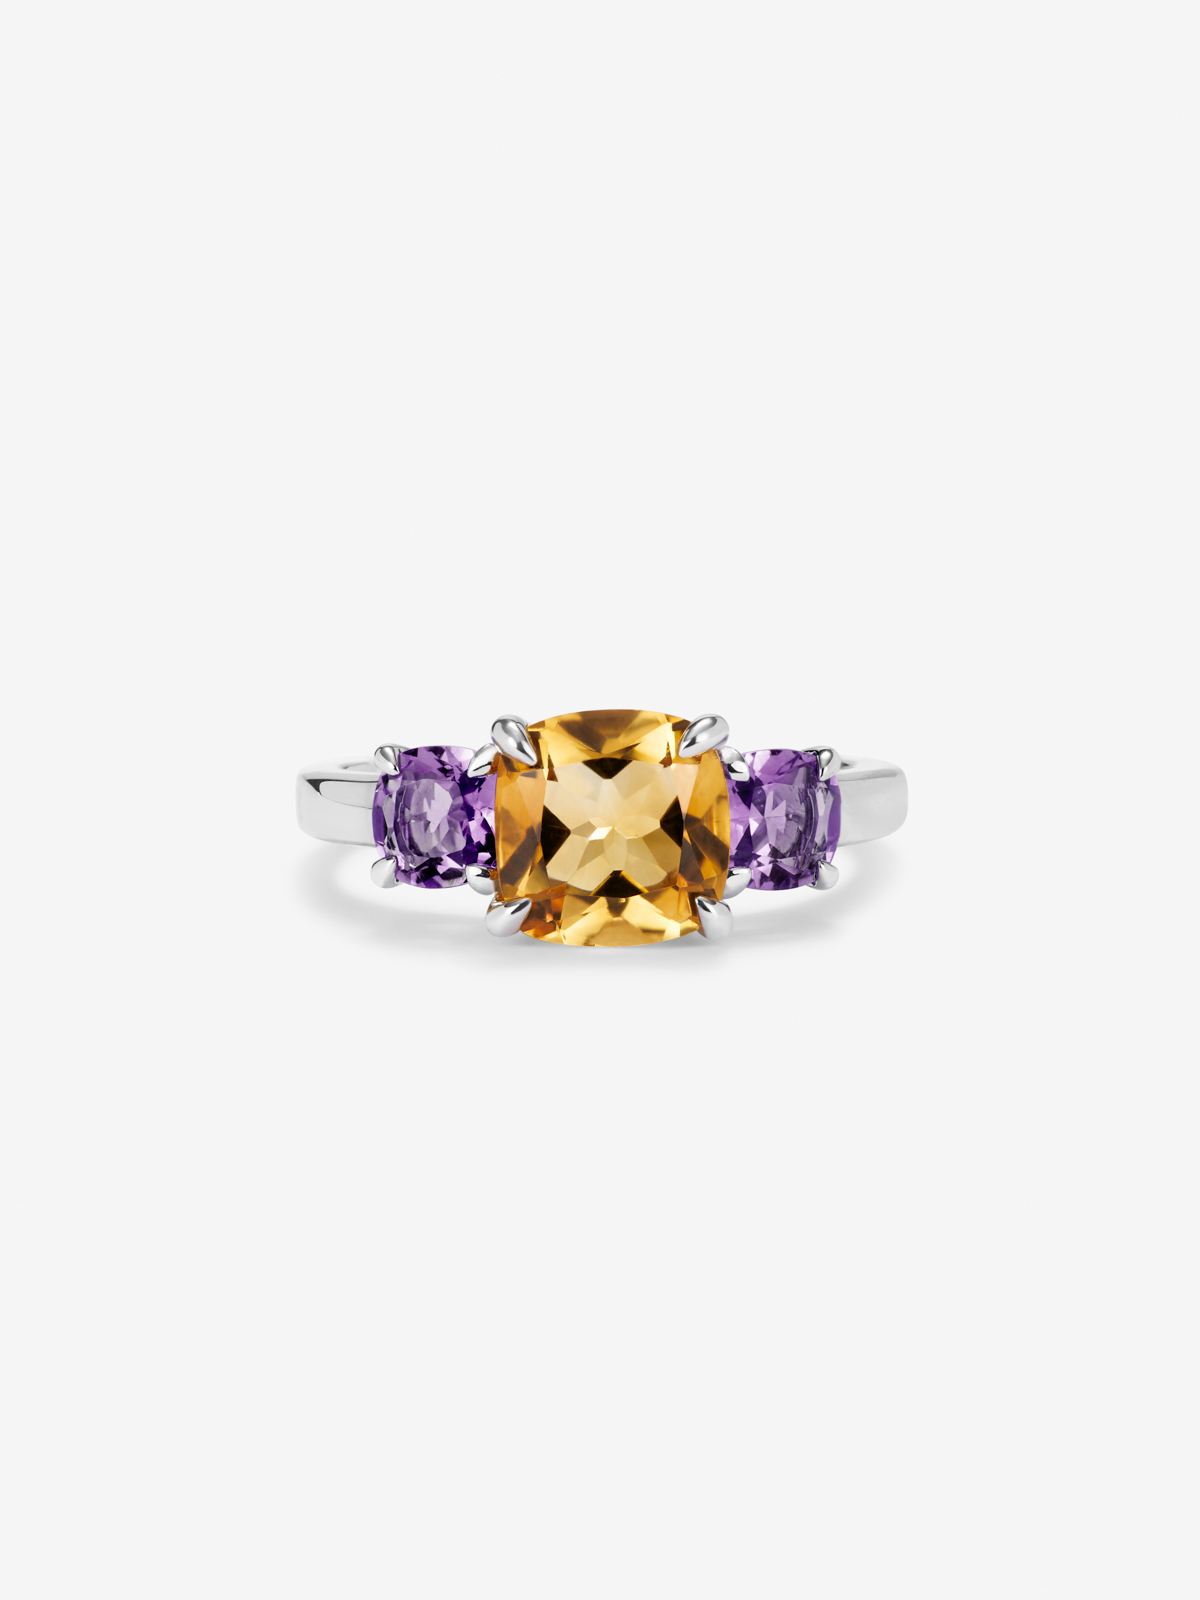 925 Silver Trilogy Ring with Citrine and Amethysts